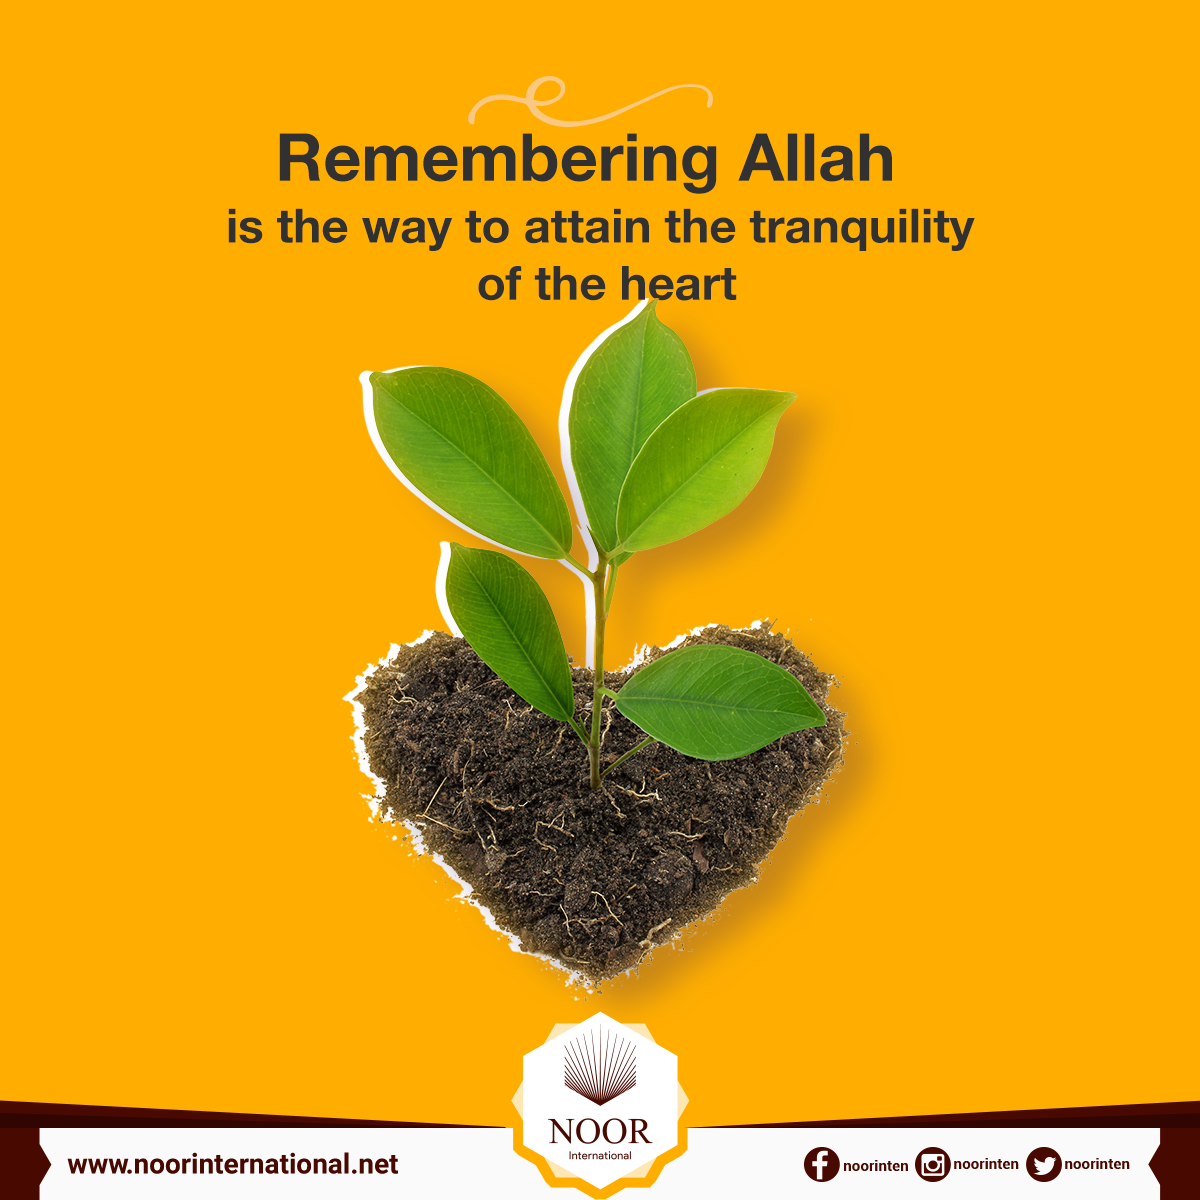 Remembering Allah is the way to attain the tranquility of the heart